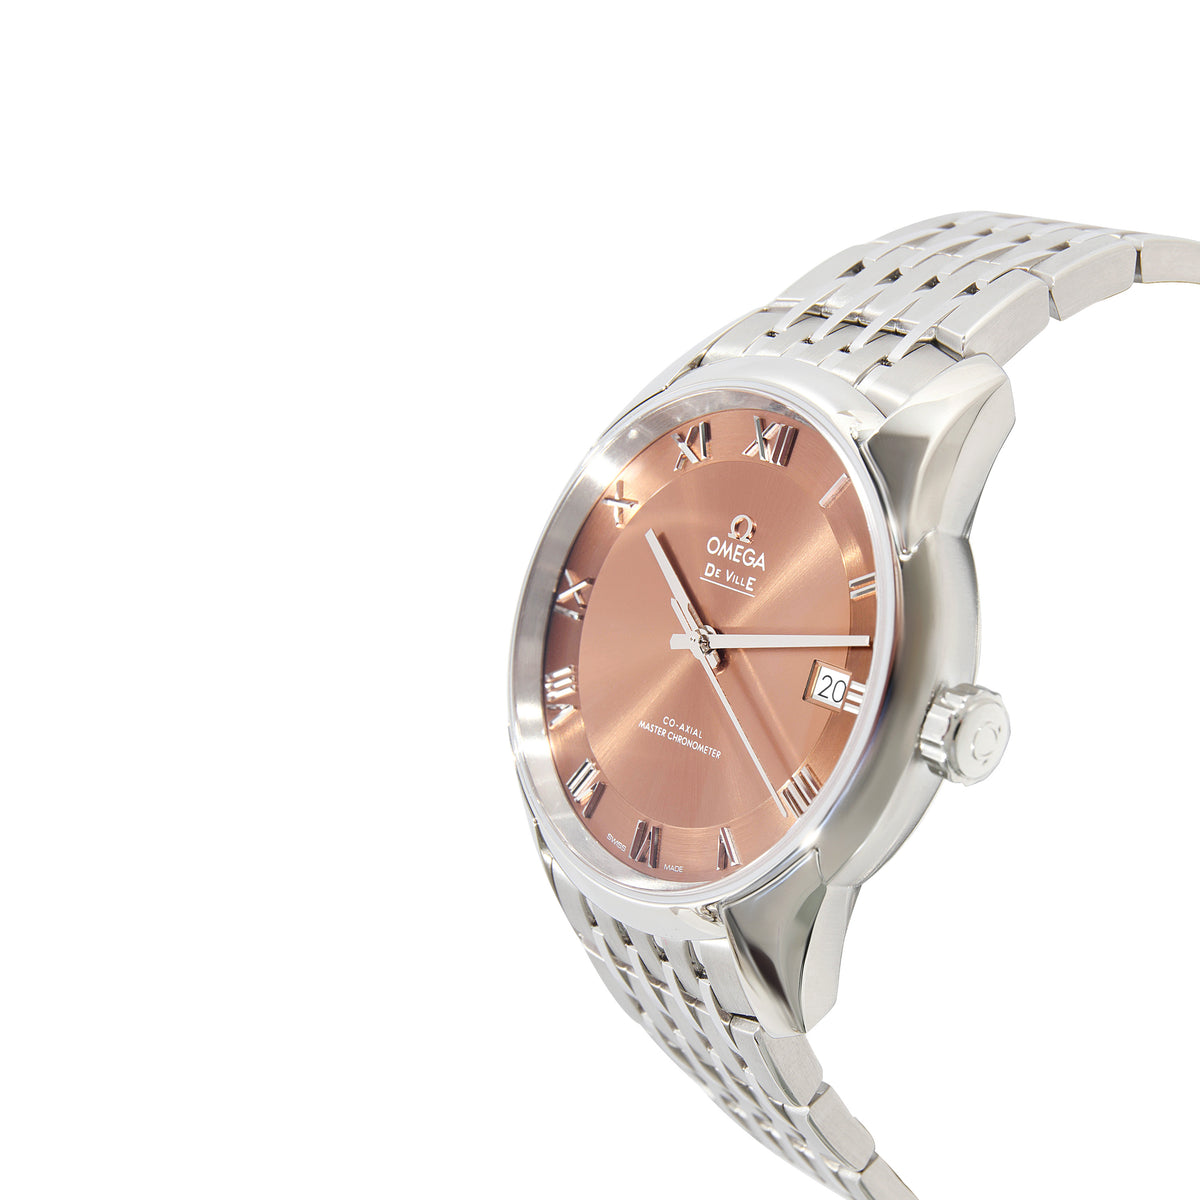 Omega DeVille Hour Vision 411.10.41.21.10.001 Men's Watch in  Stainless Steel